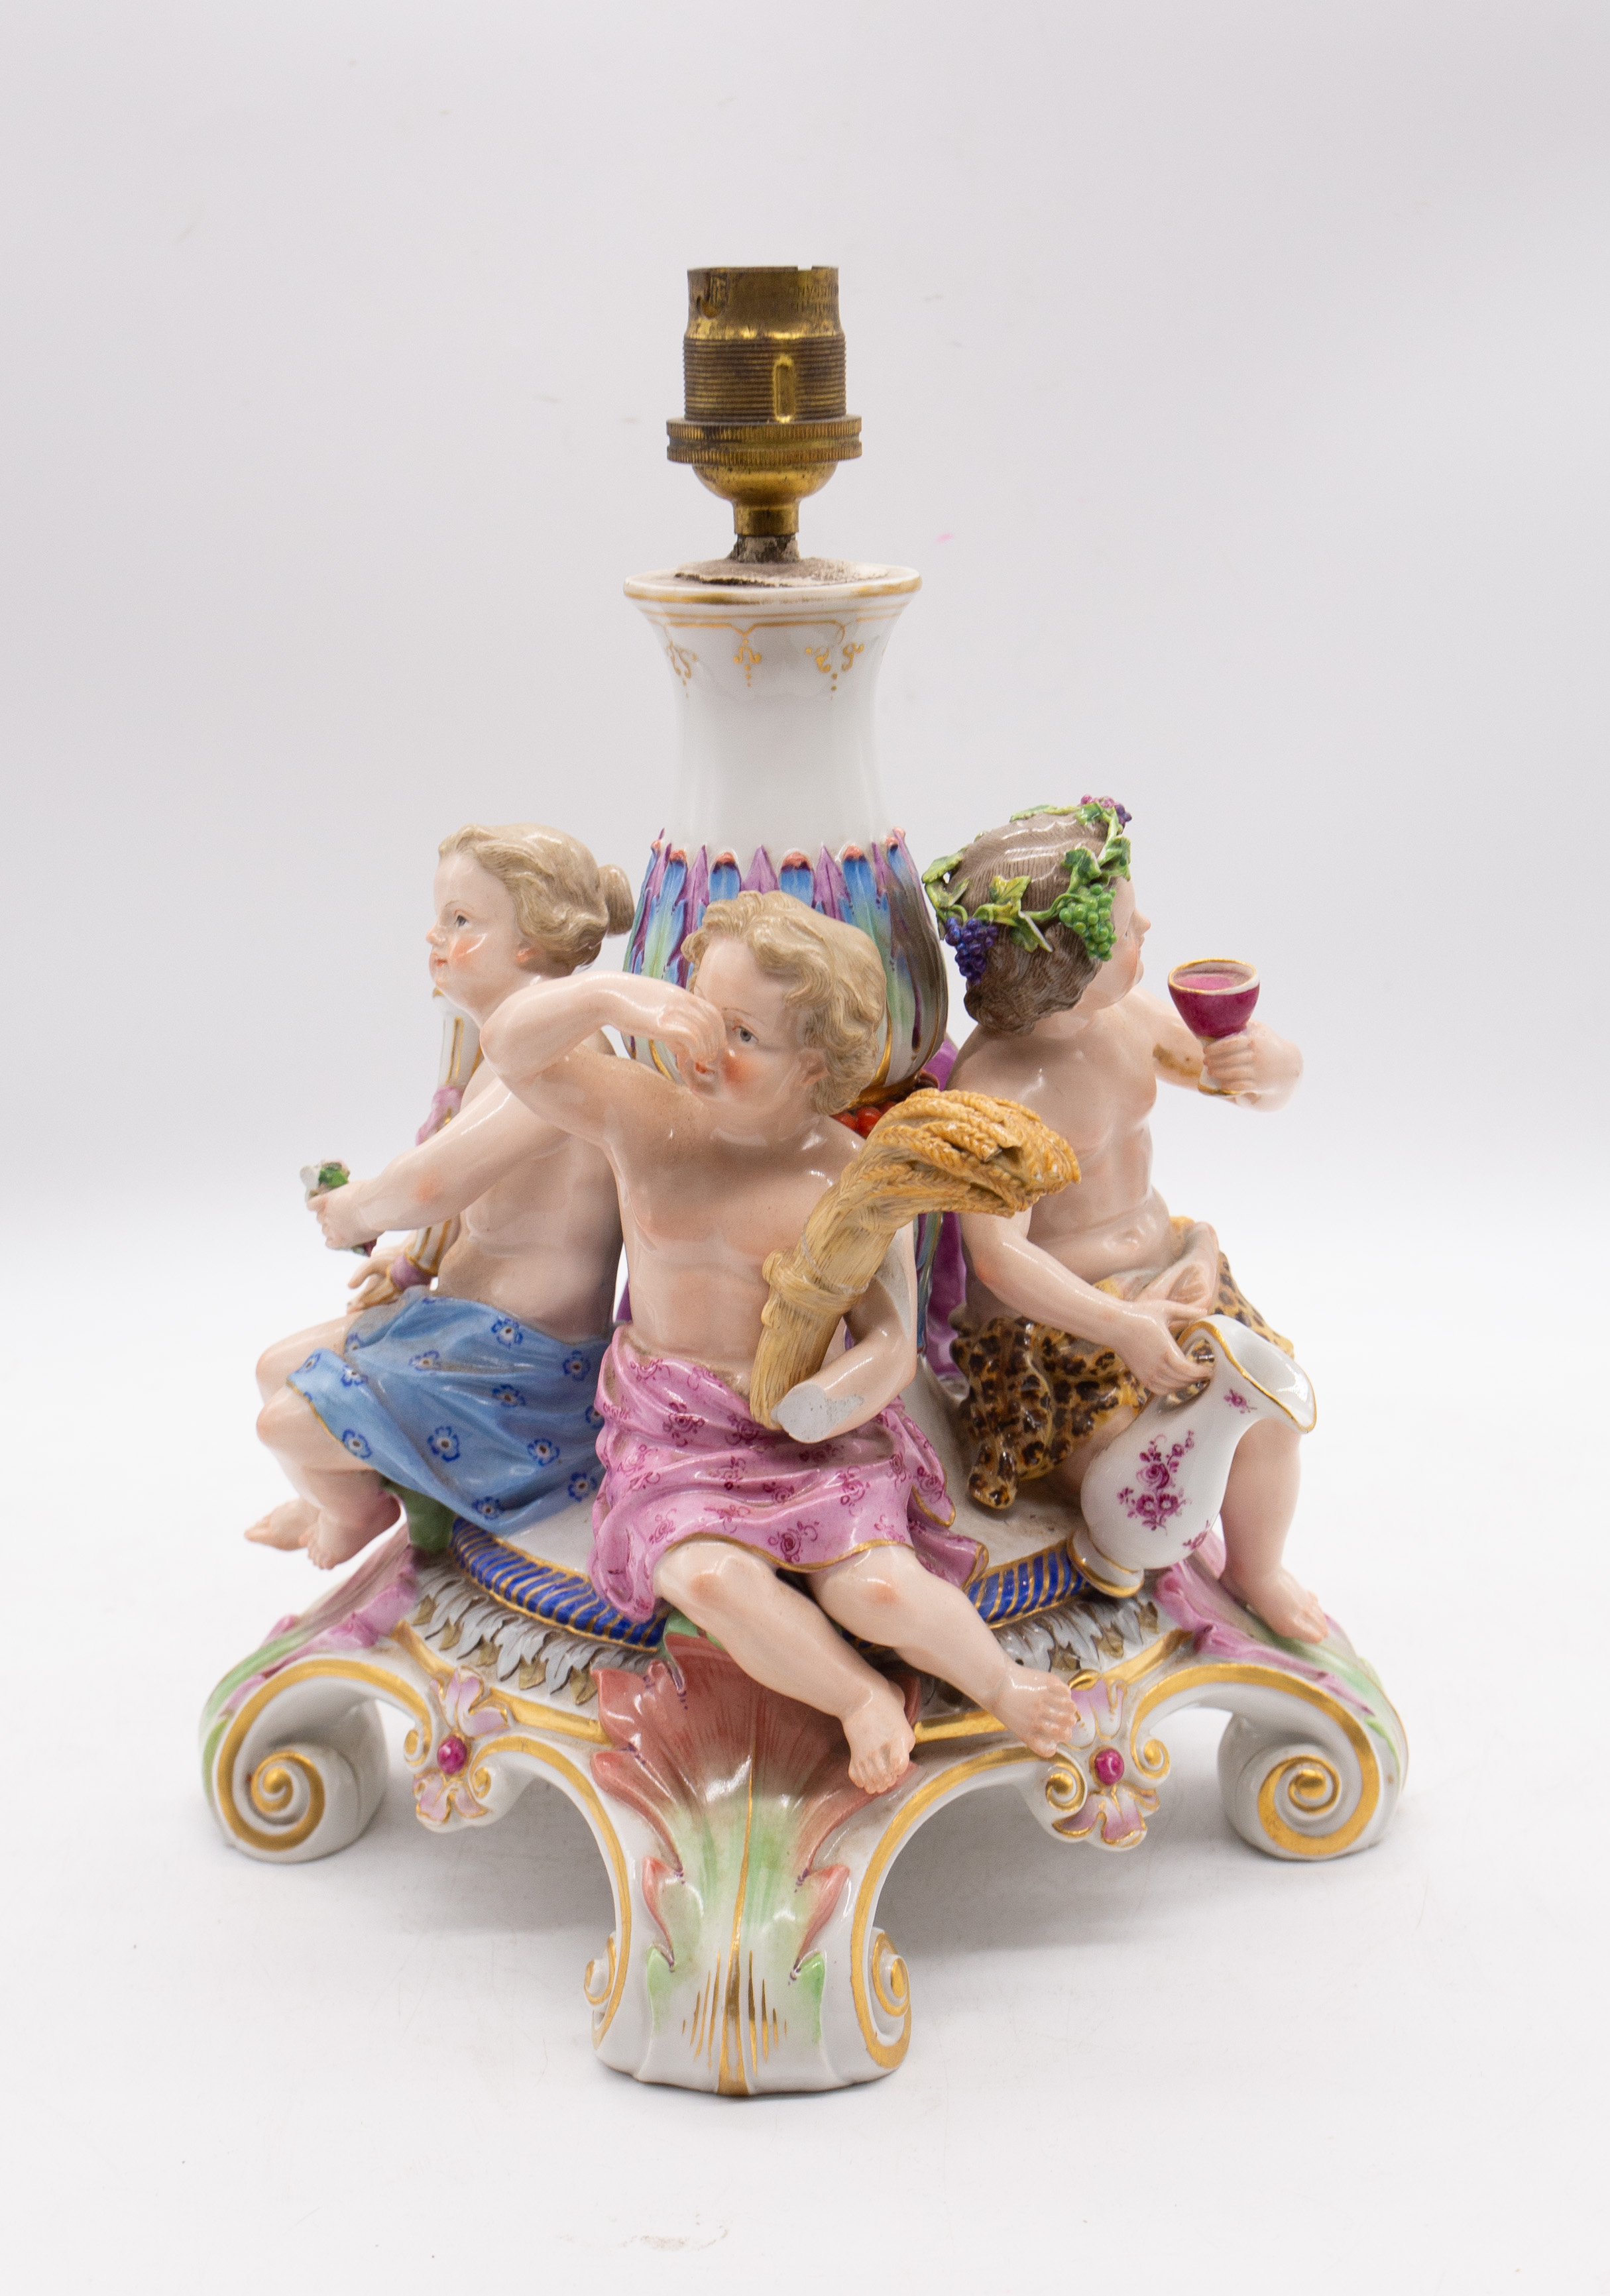 Meissen - A 19th century painted ceramic comport base, broken in the past and turned into lamp base. - Image 3 of 6